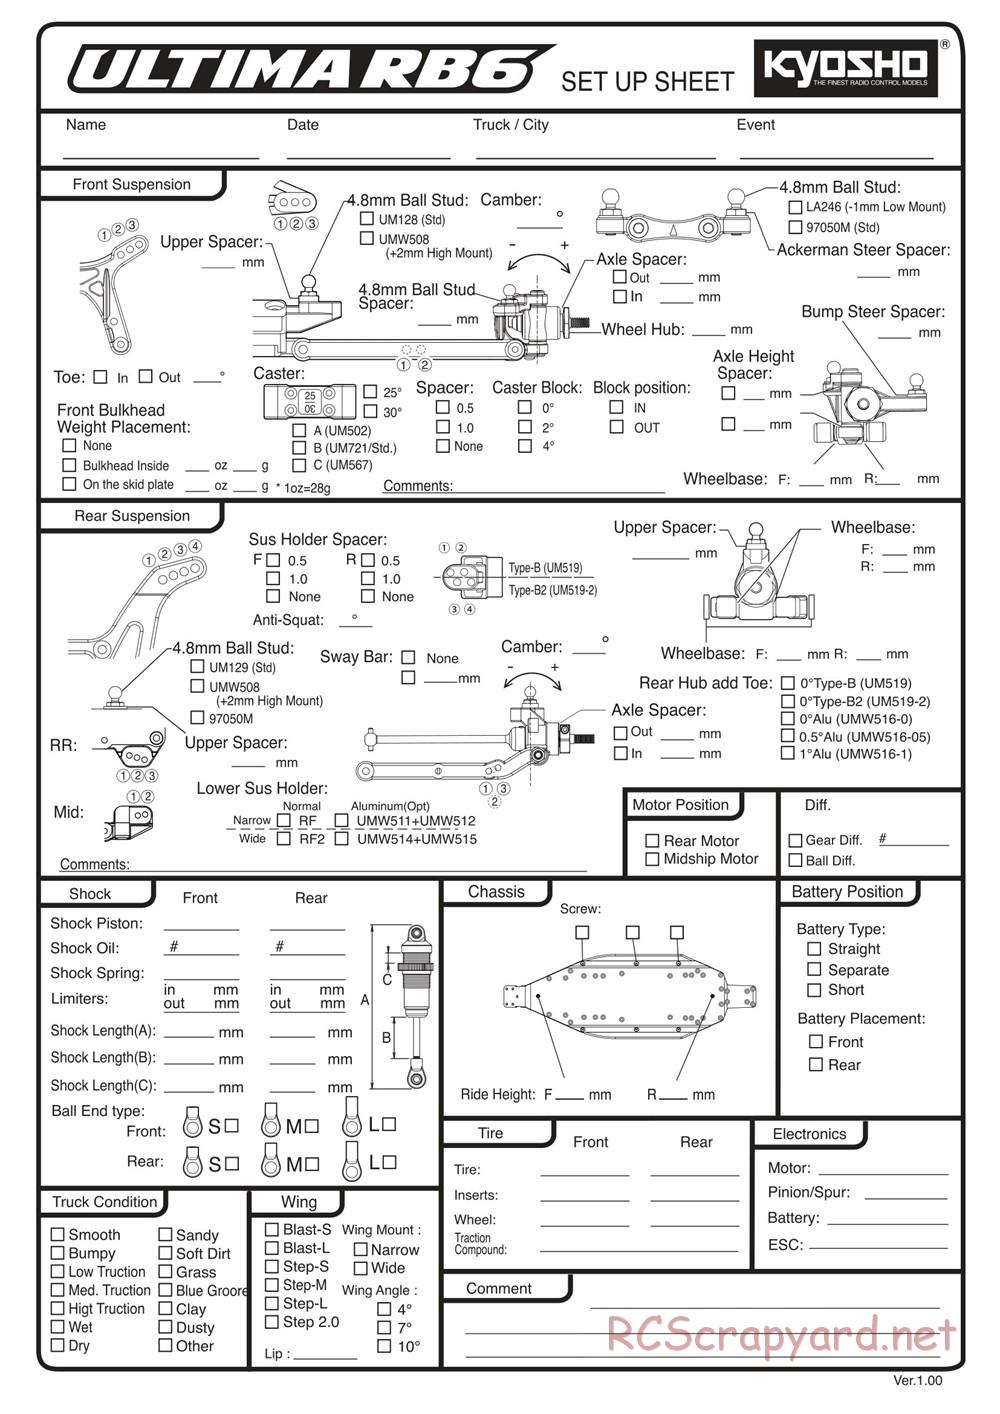 Kyosho - Ultima RB6 - Manual - Page 37